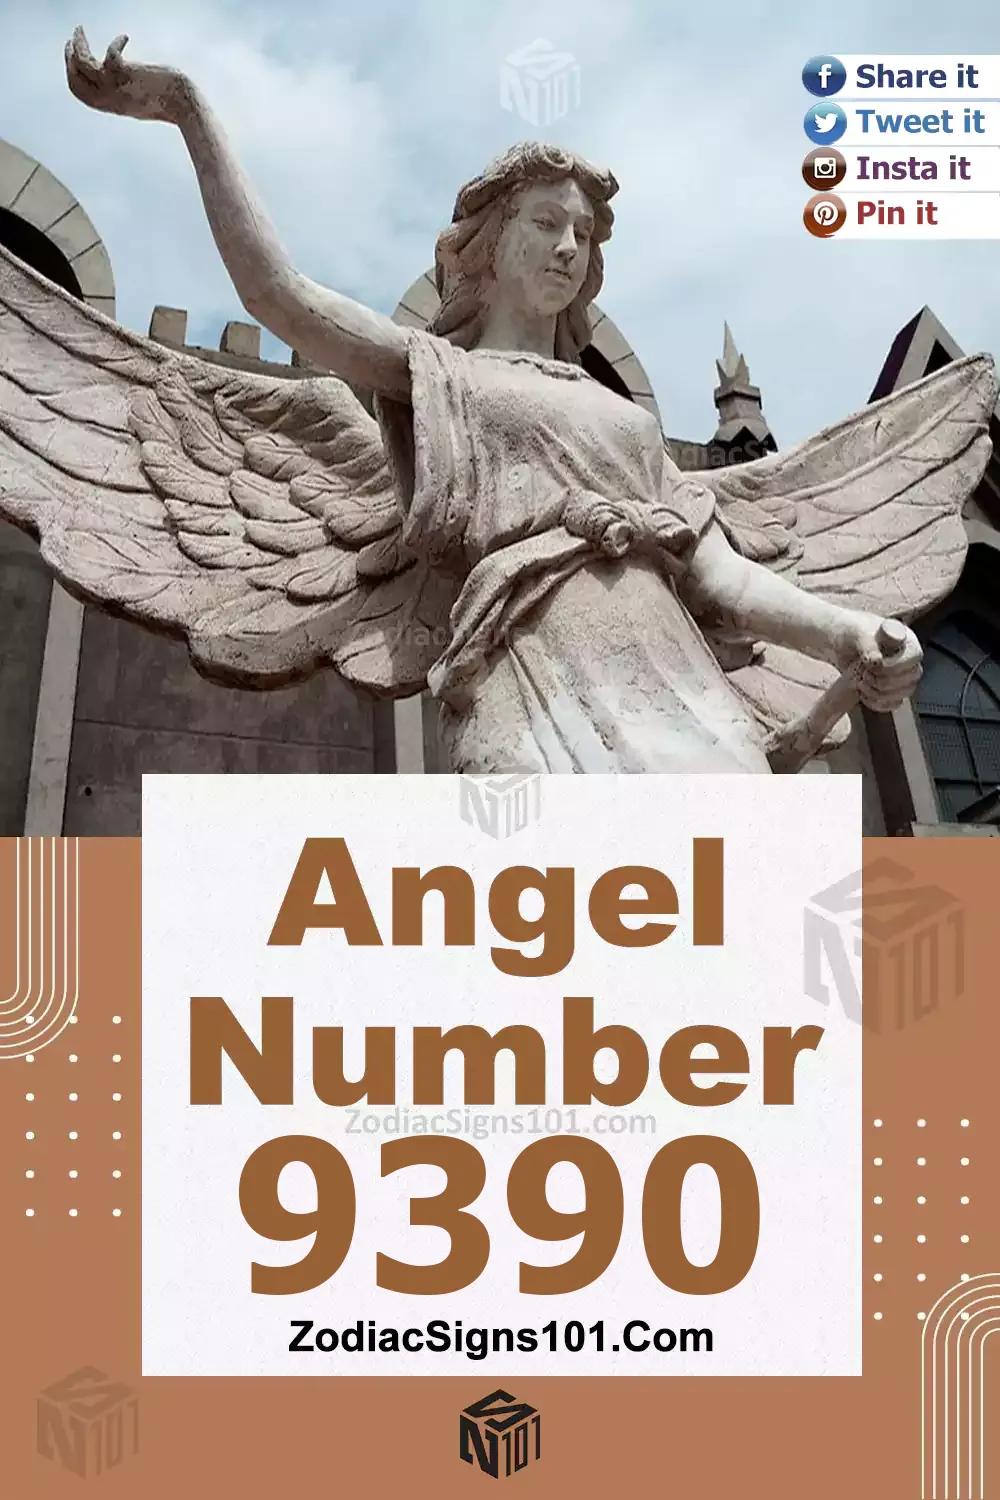 9390 Angel Number Meaning